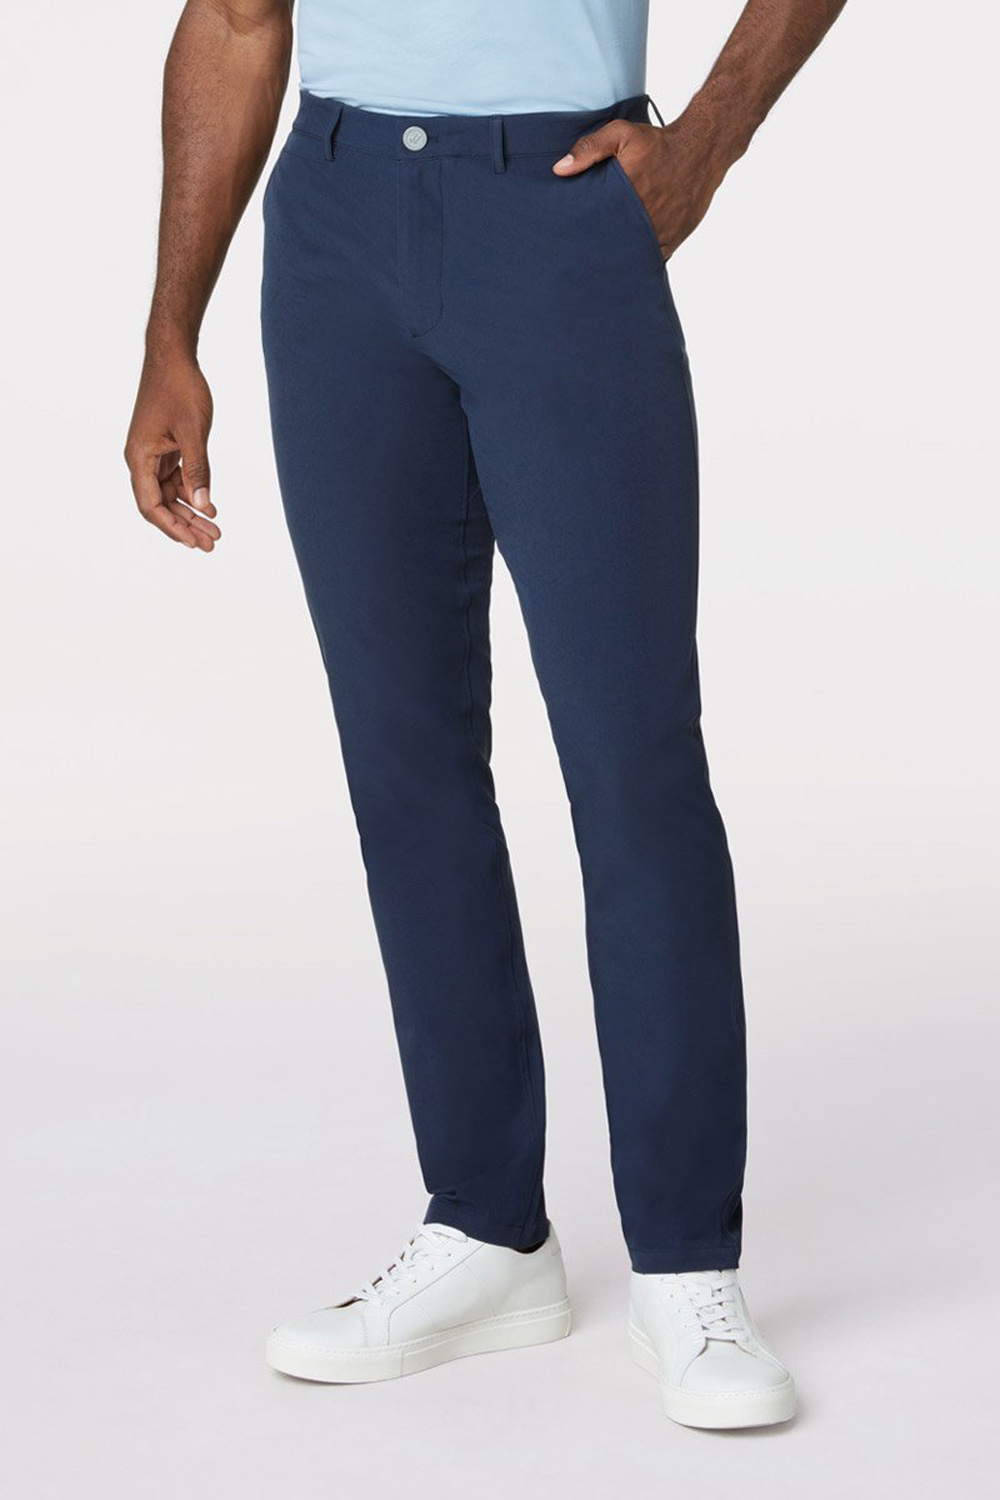 willy california nicer pants athleisure